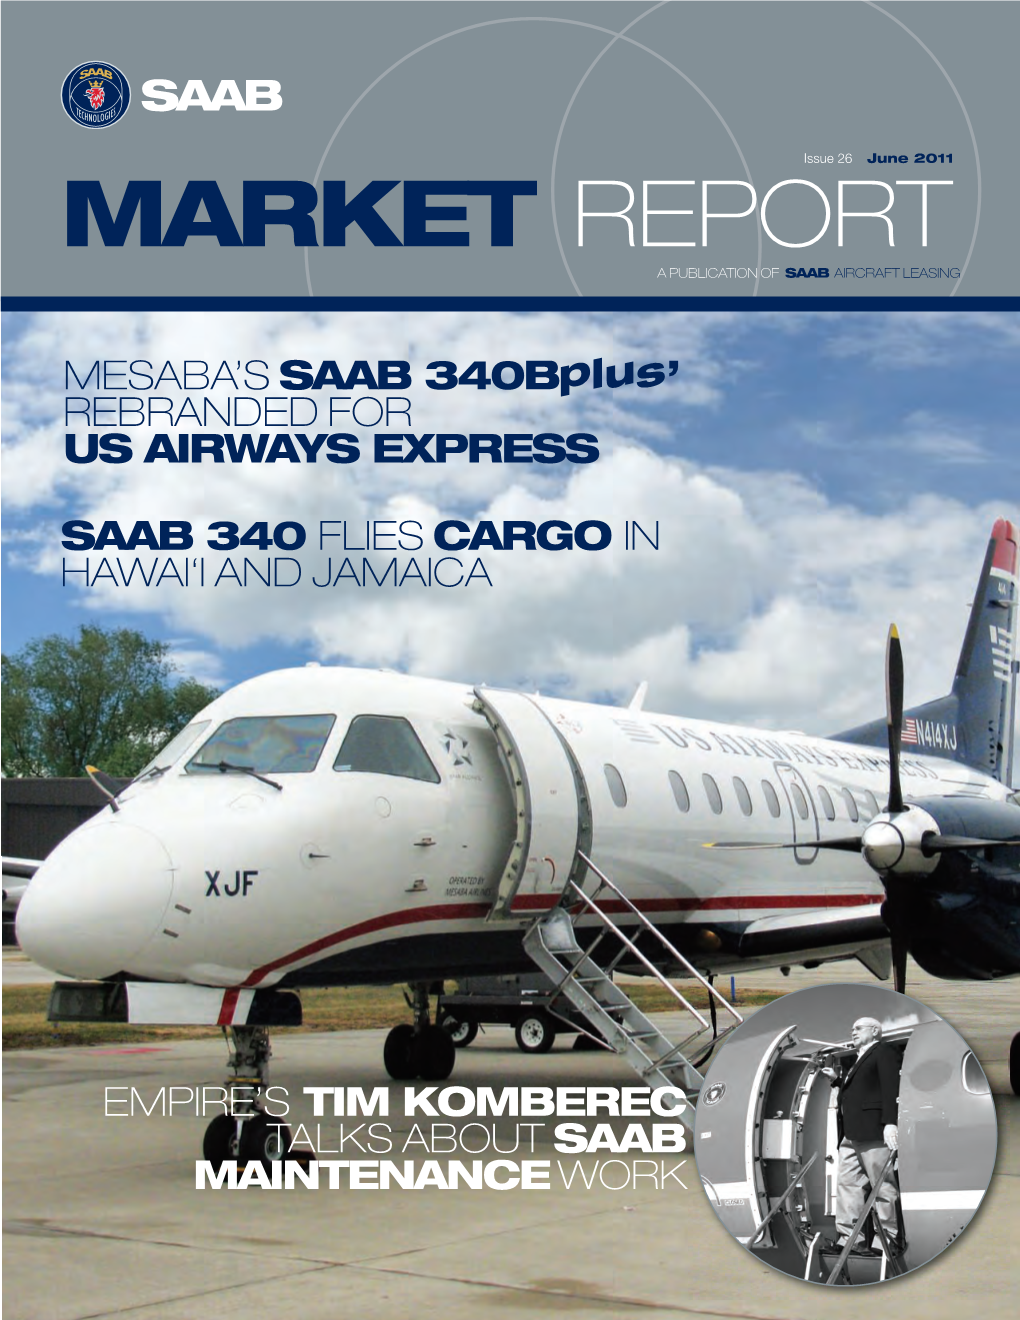 Market Report a Publication of Saab Aircraft Leasing